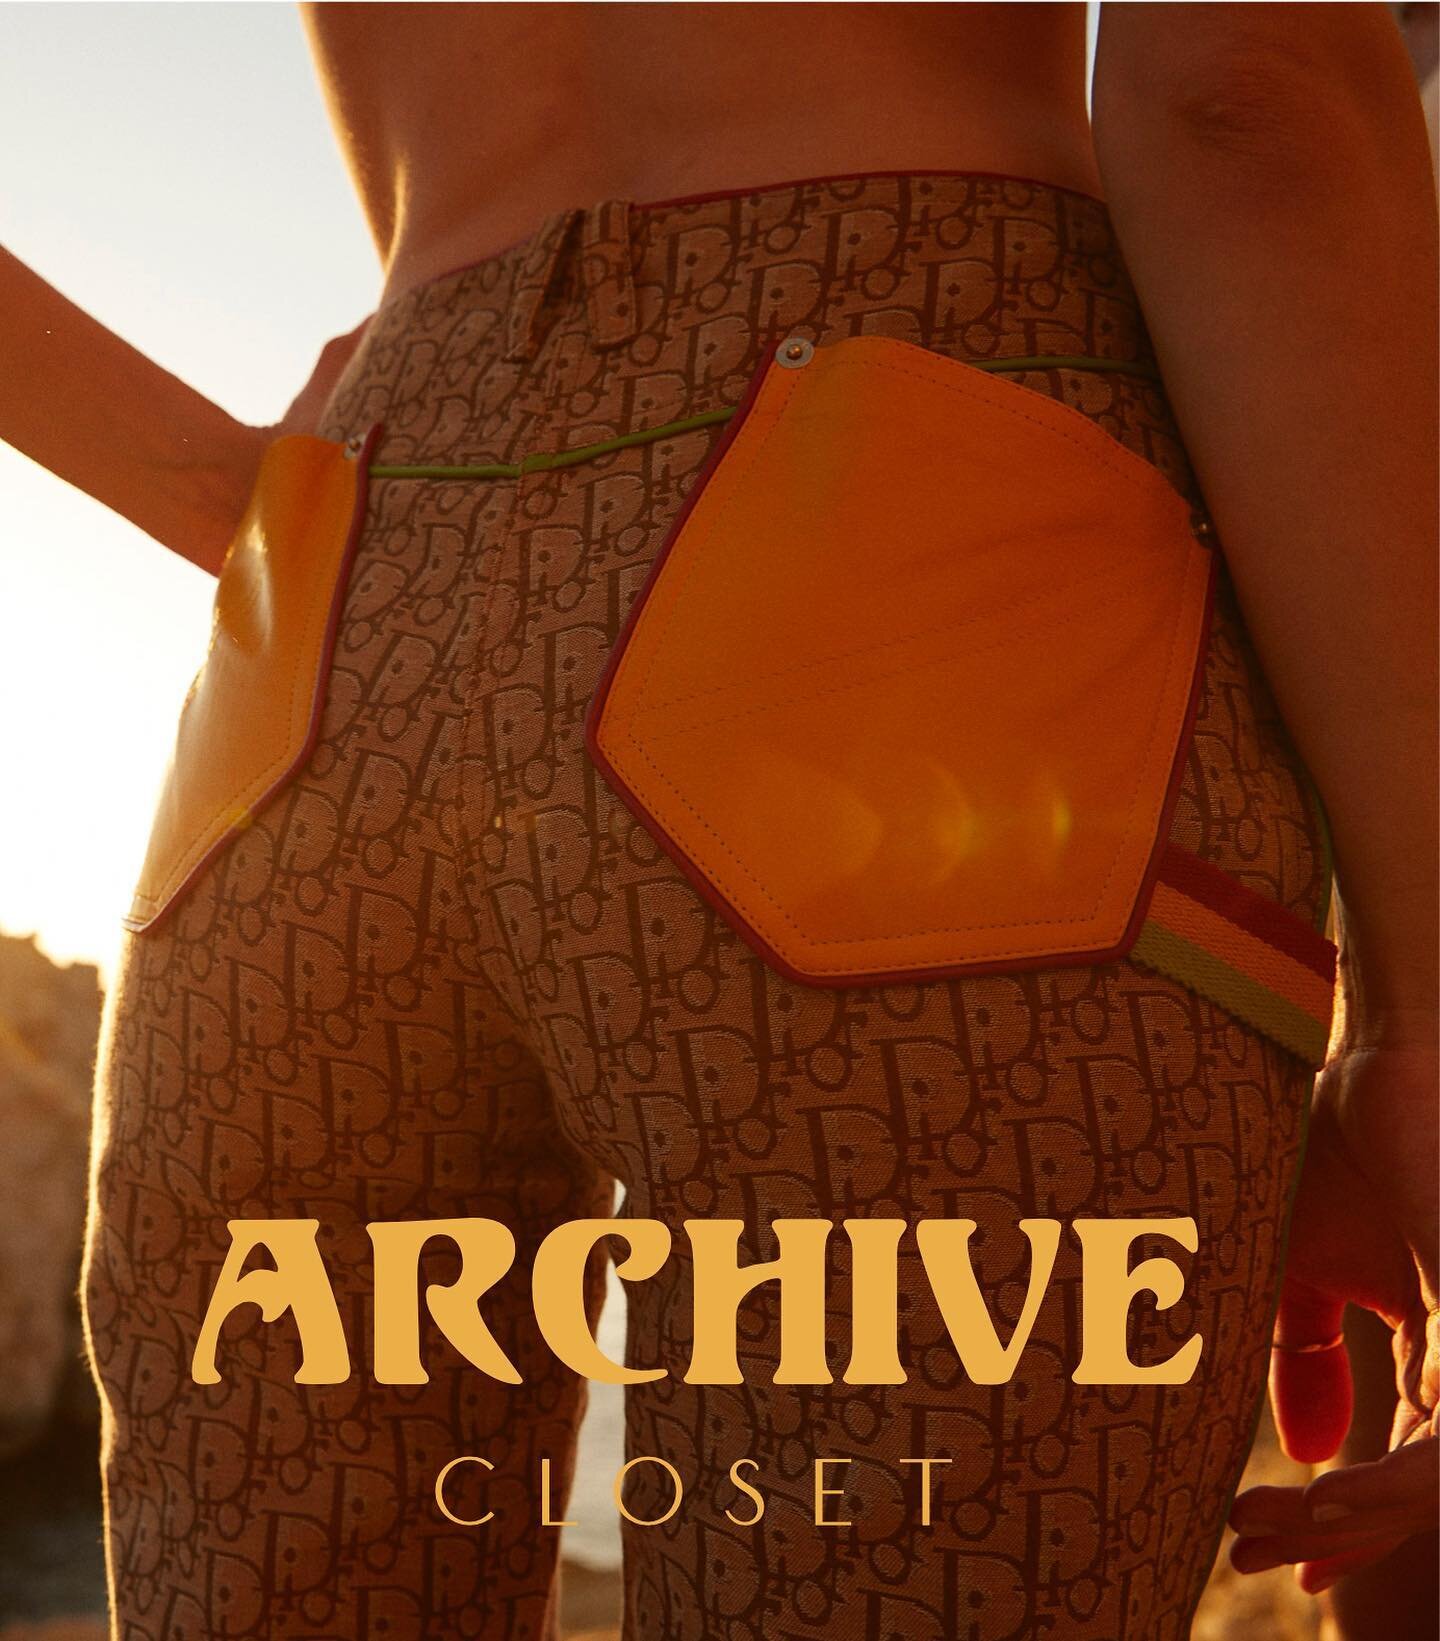 A big shout out to the great team who participated in putting together our first campaign, shot on some hidden beaches of the white island and that genuinely translates the core and vision of @archivecloset_ ,wild, raw, timeless and sustainable.

Sho